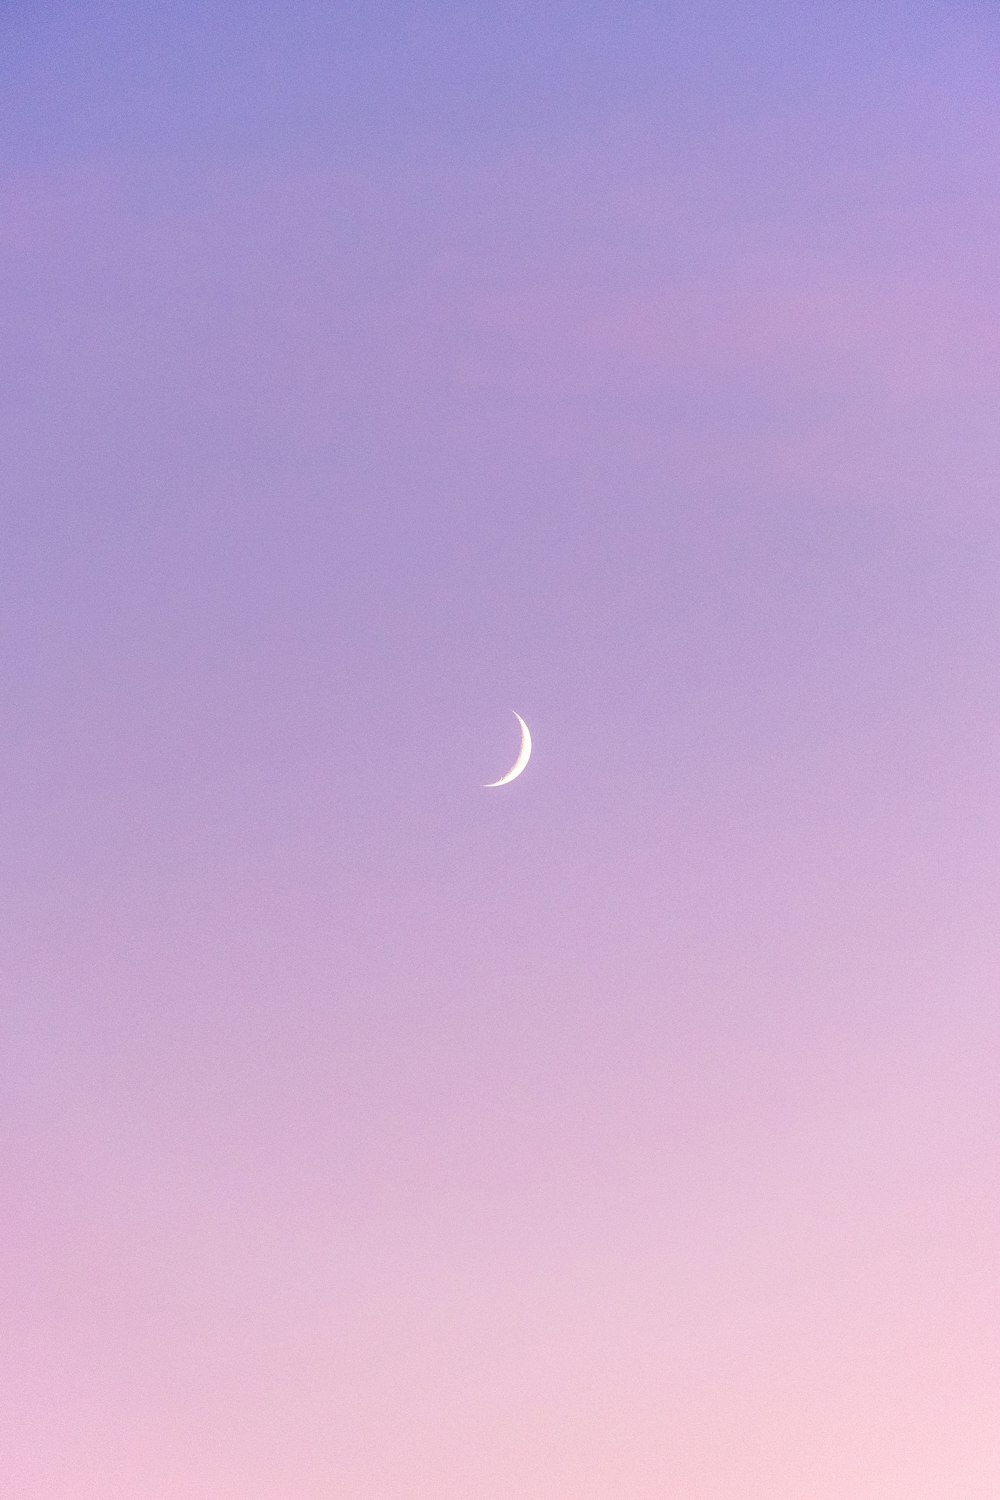 the moon is visible in the purple sky